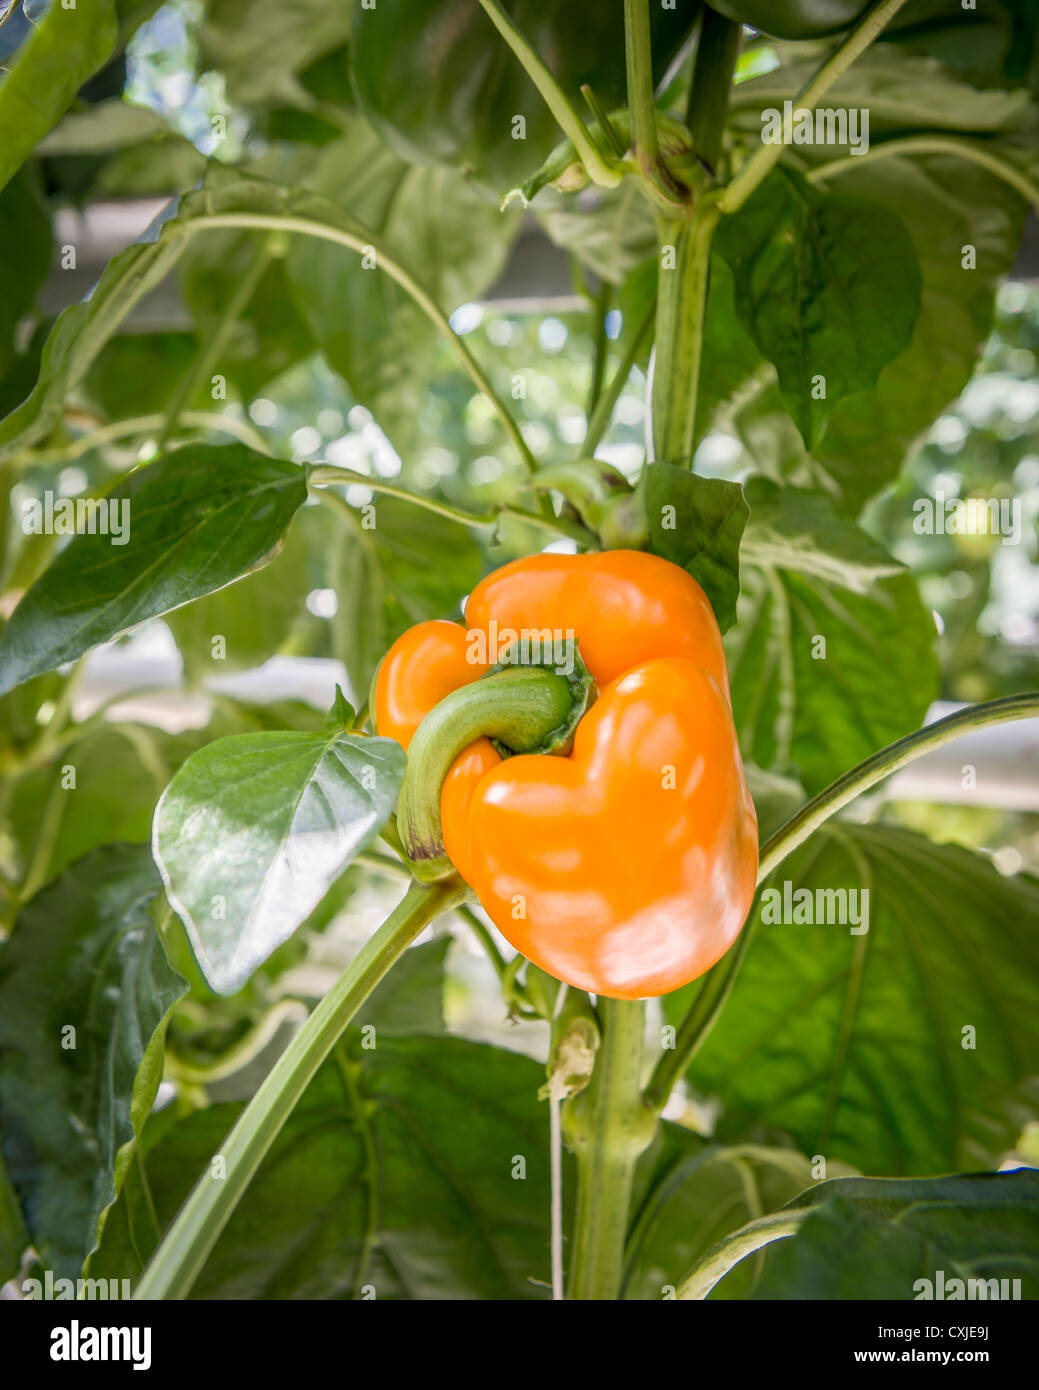 Orange pepper growing in greenhouse, Iceland Greenhouses are heated with geothermal energy. Stock Photo